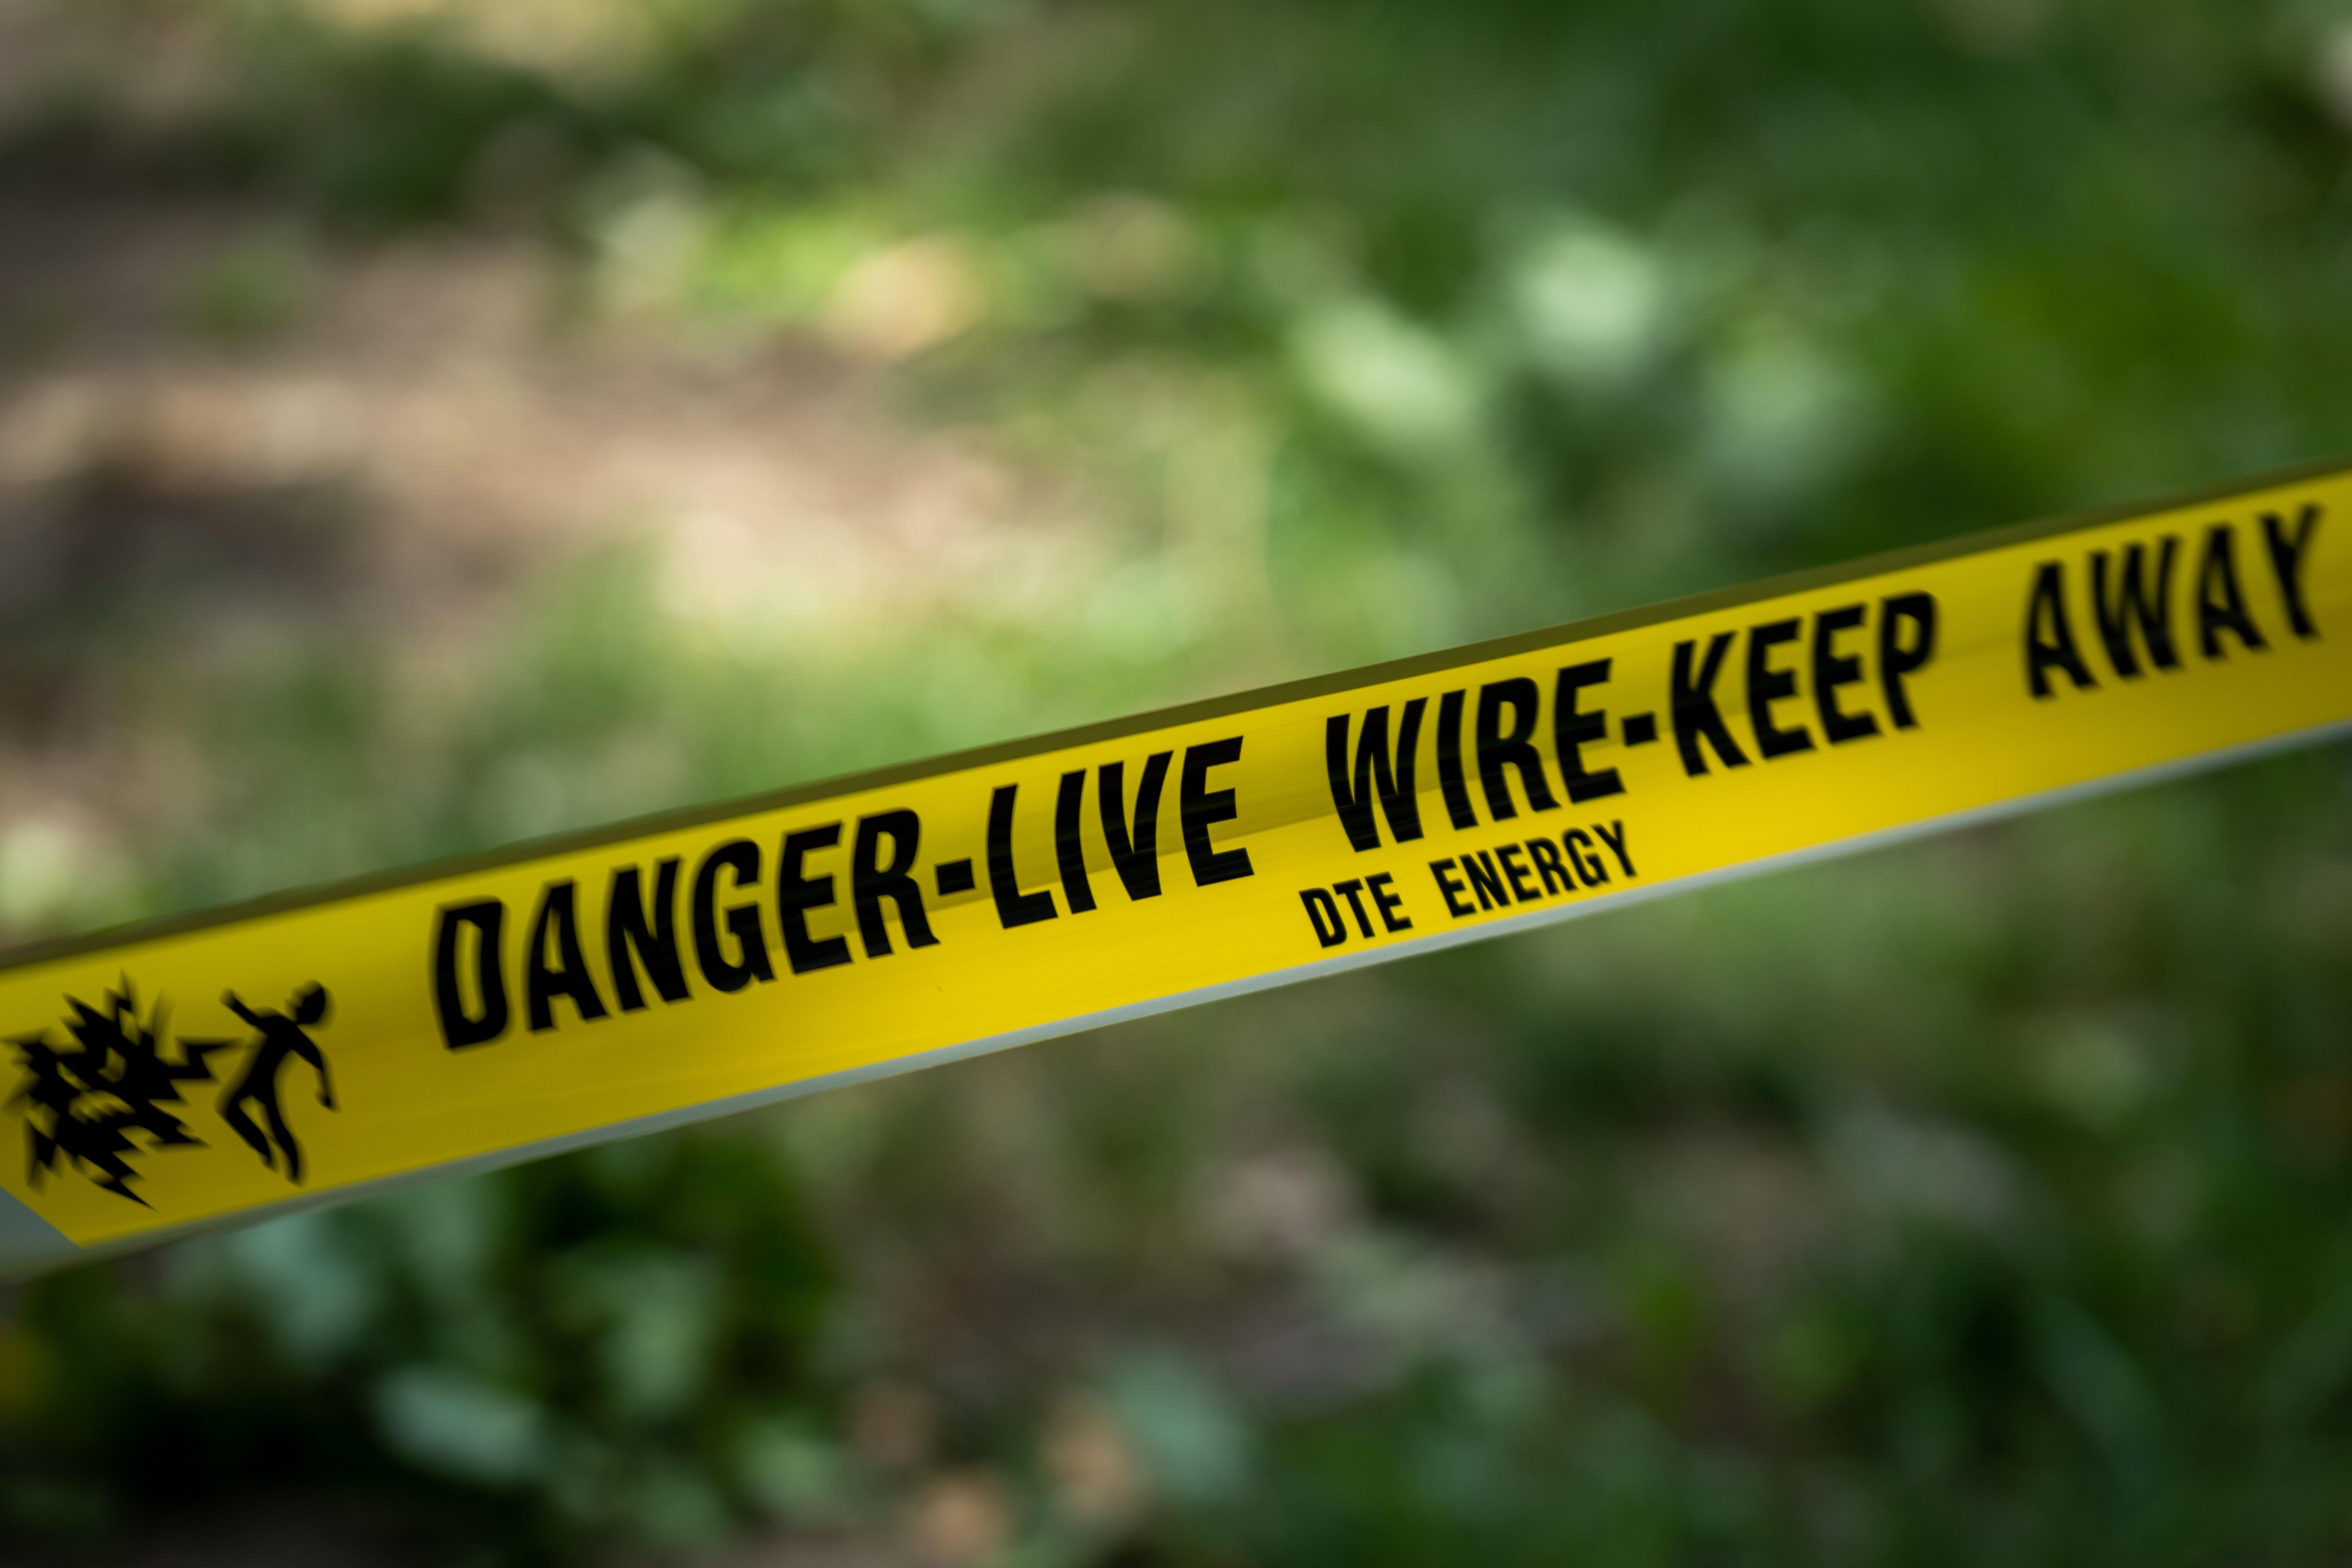 Yellow caution tape that says DANGER-LIVE WIRE-KEEP AWAY and DTE ENERGY written under it